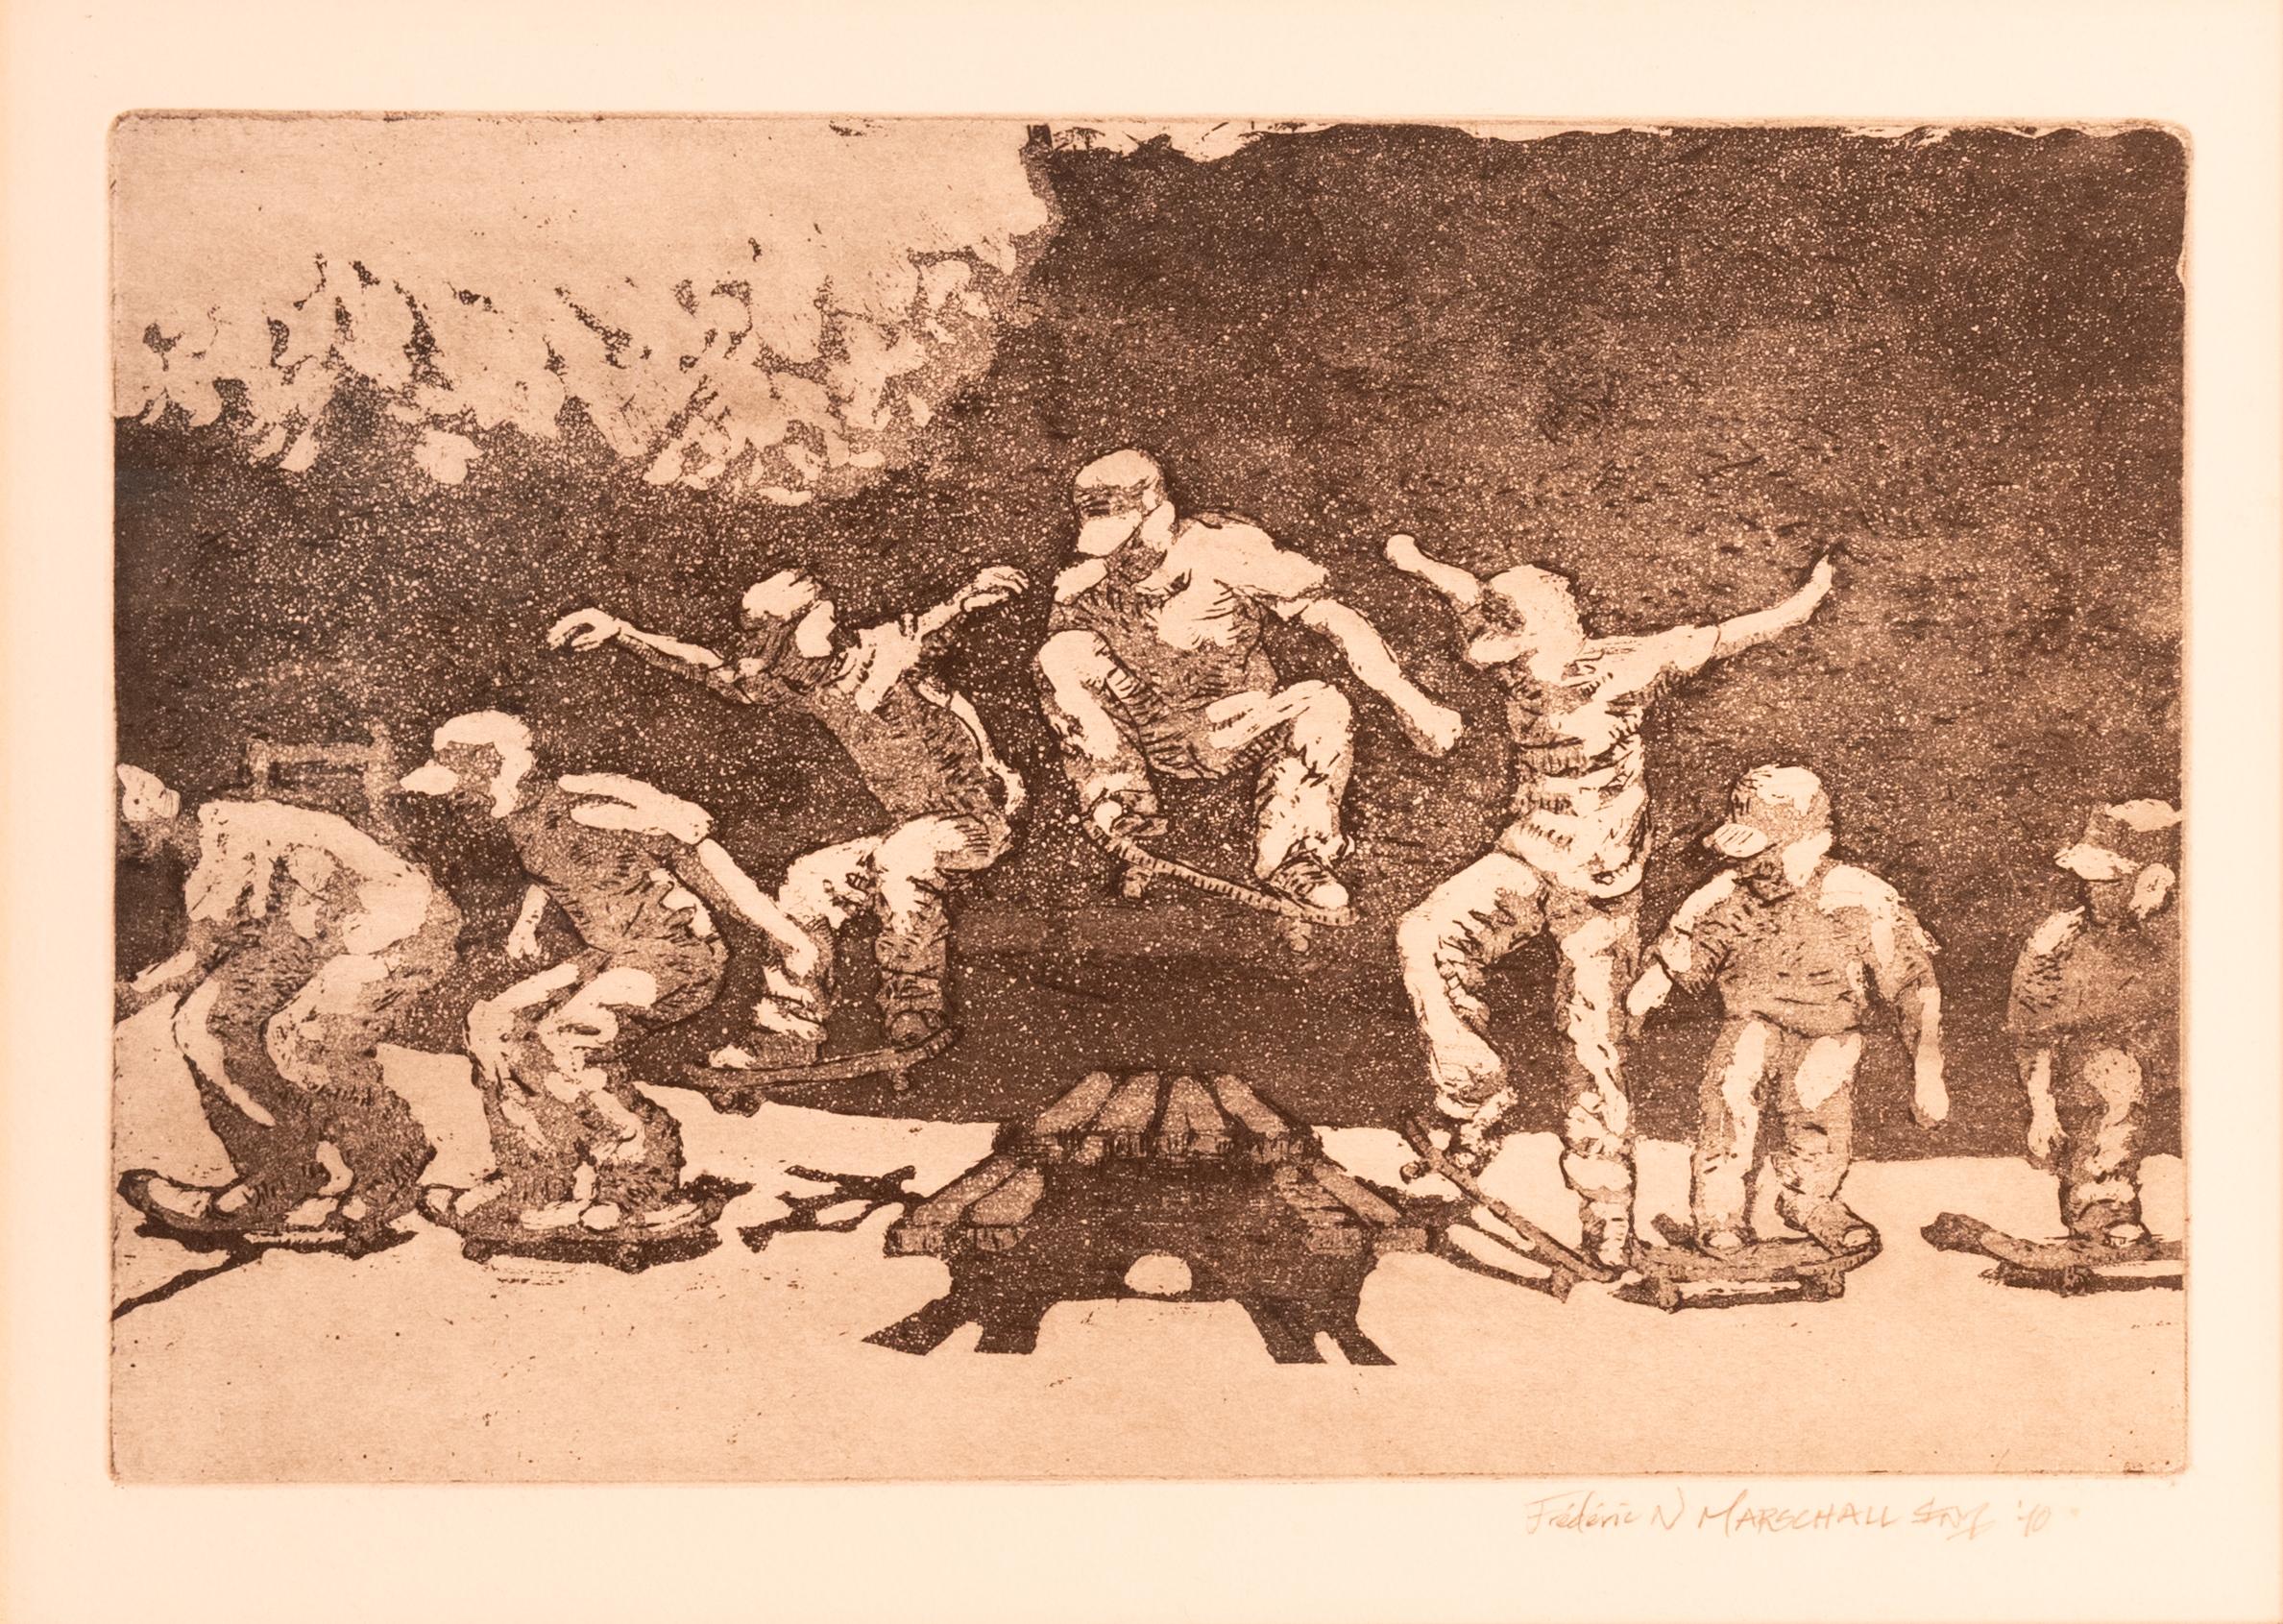 1 etching and 1 aquatint of skating youngsters (2010) - Realist Print by Frederic Marschall